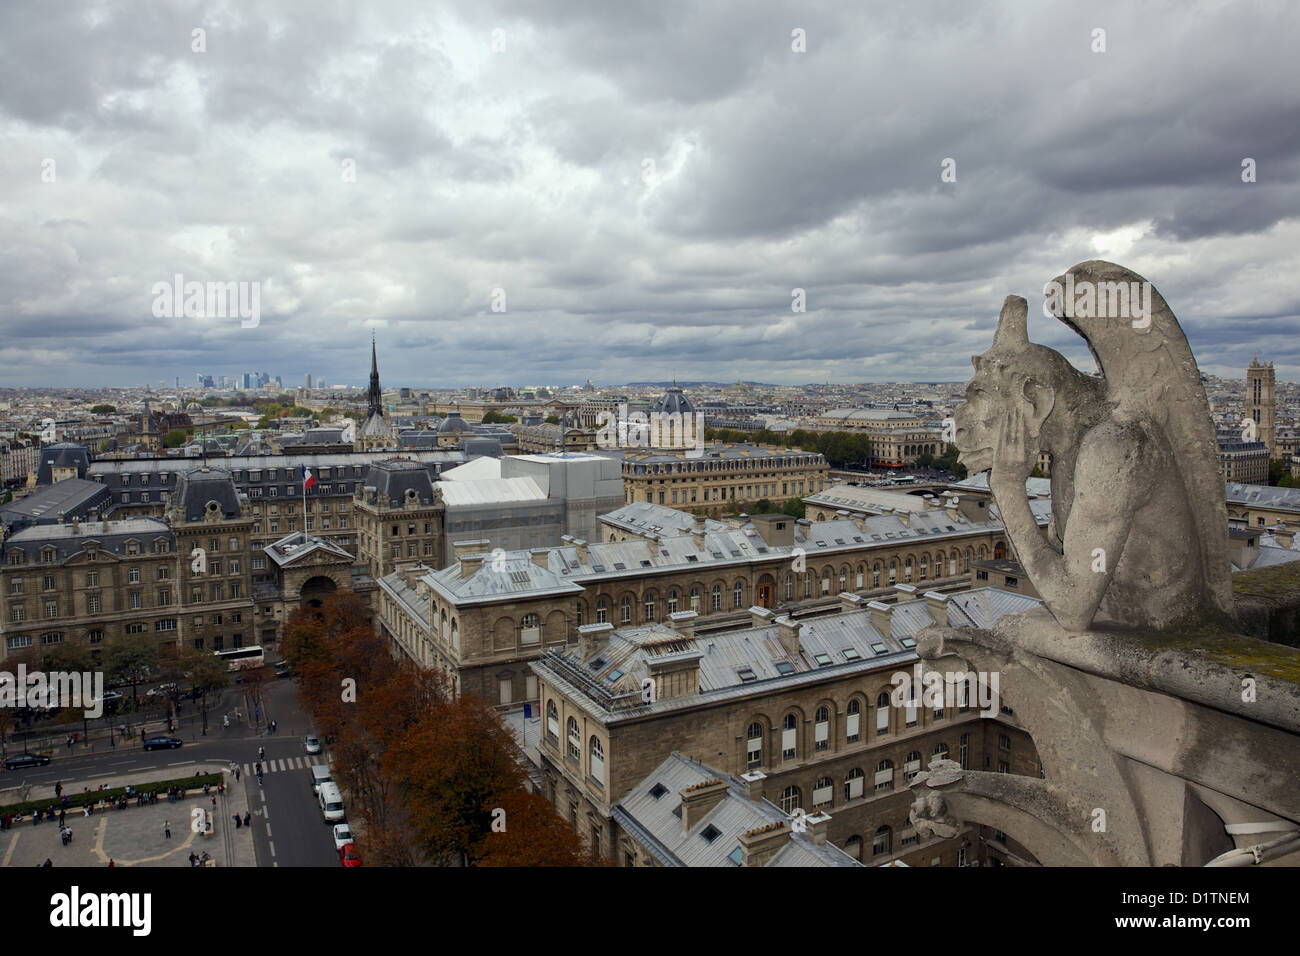 Gargoyle on the roof of the Notre Dame Cathedral in Paris, Ile de la Cite, France Stock Photo